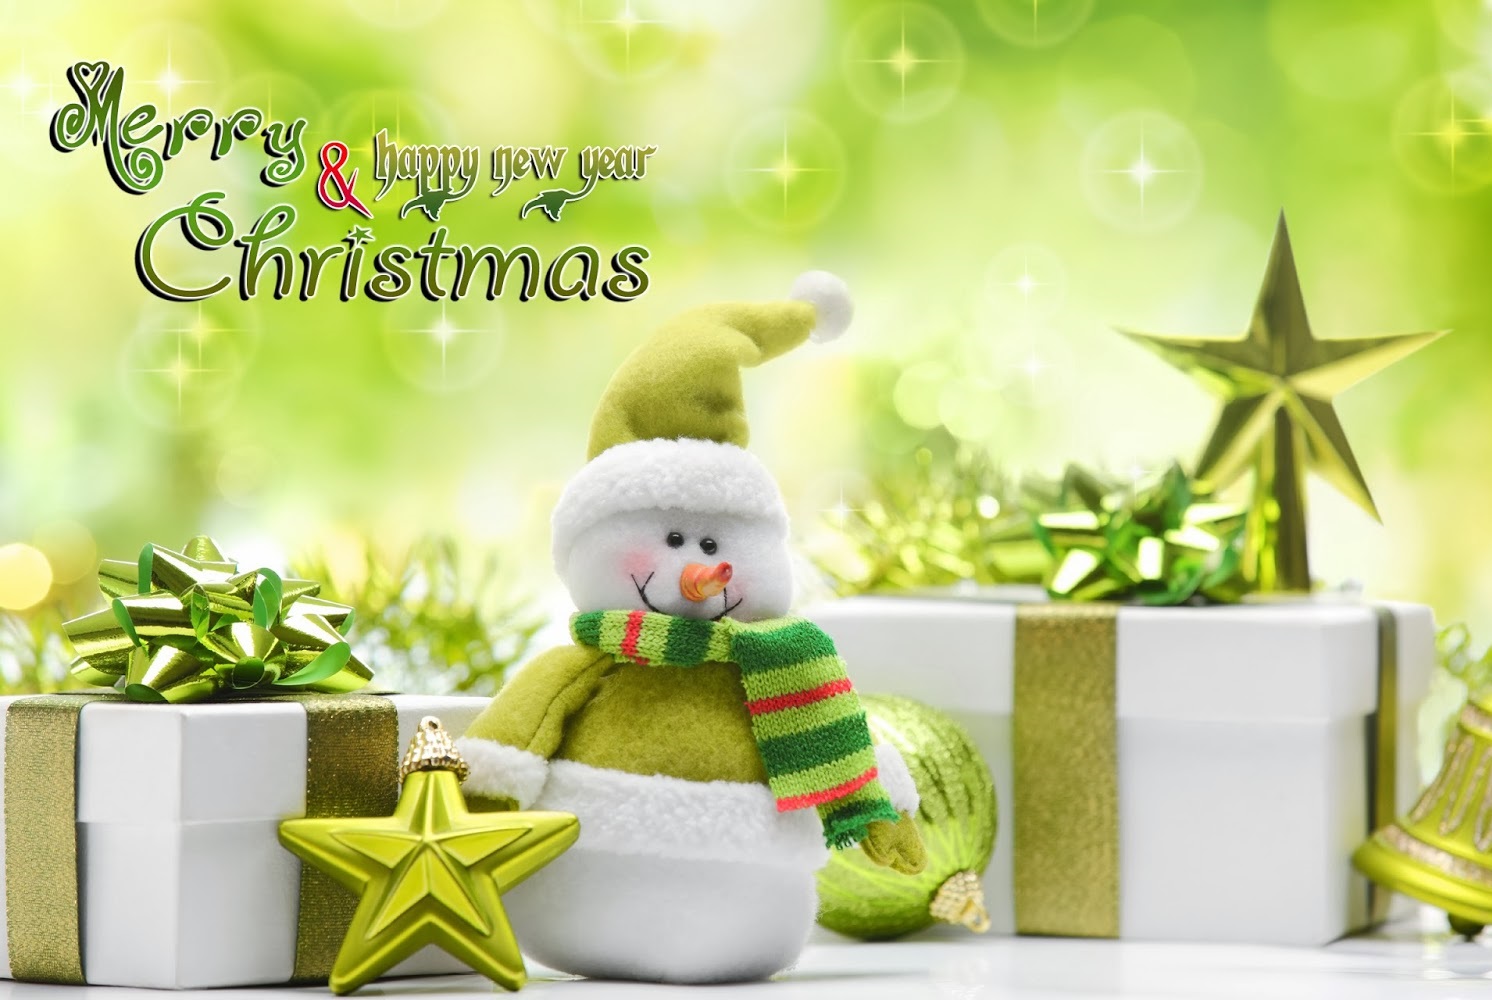 merry christmas and new year wallpaper hd